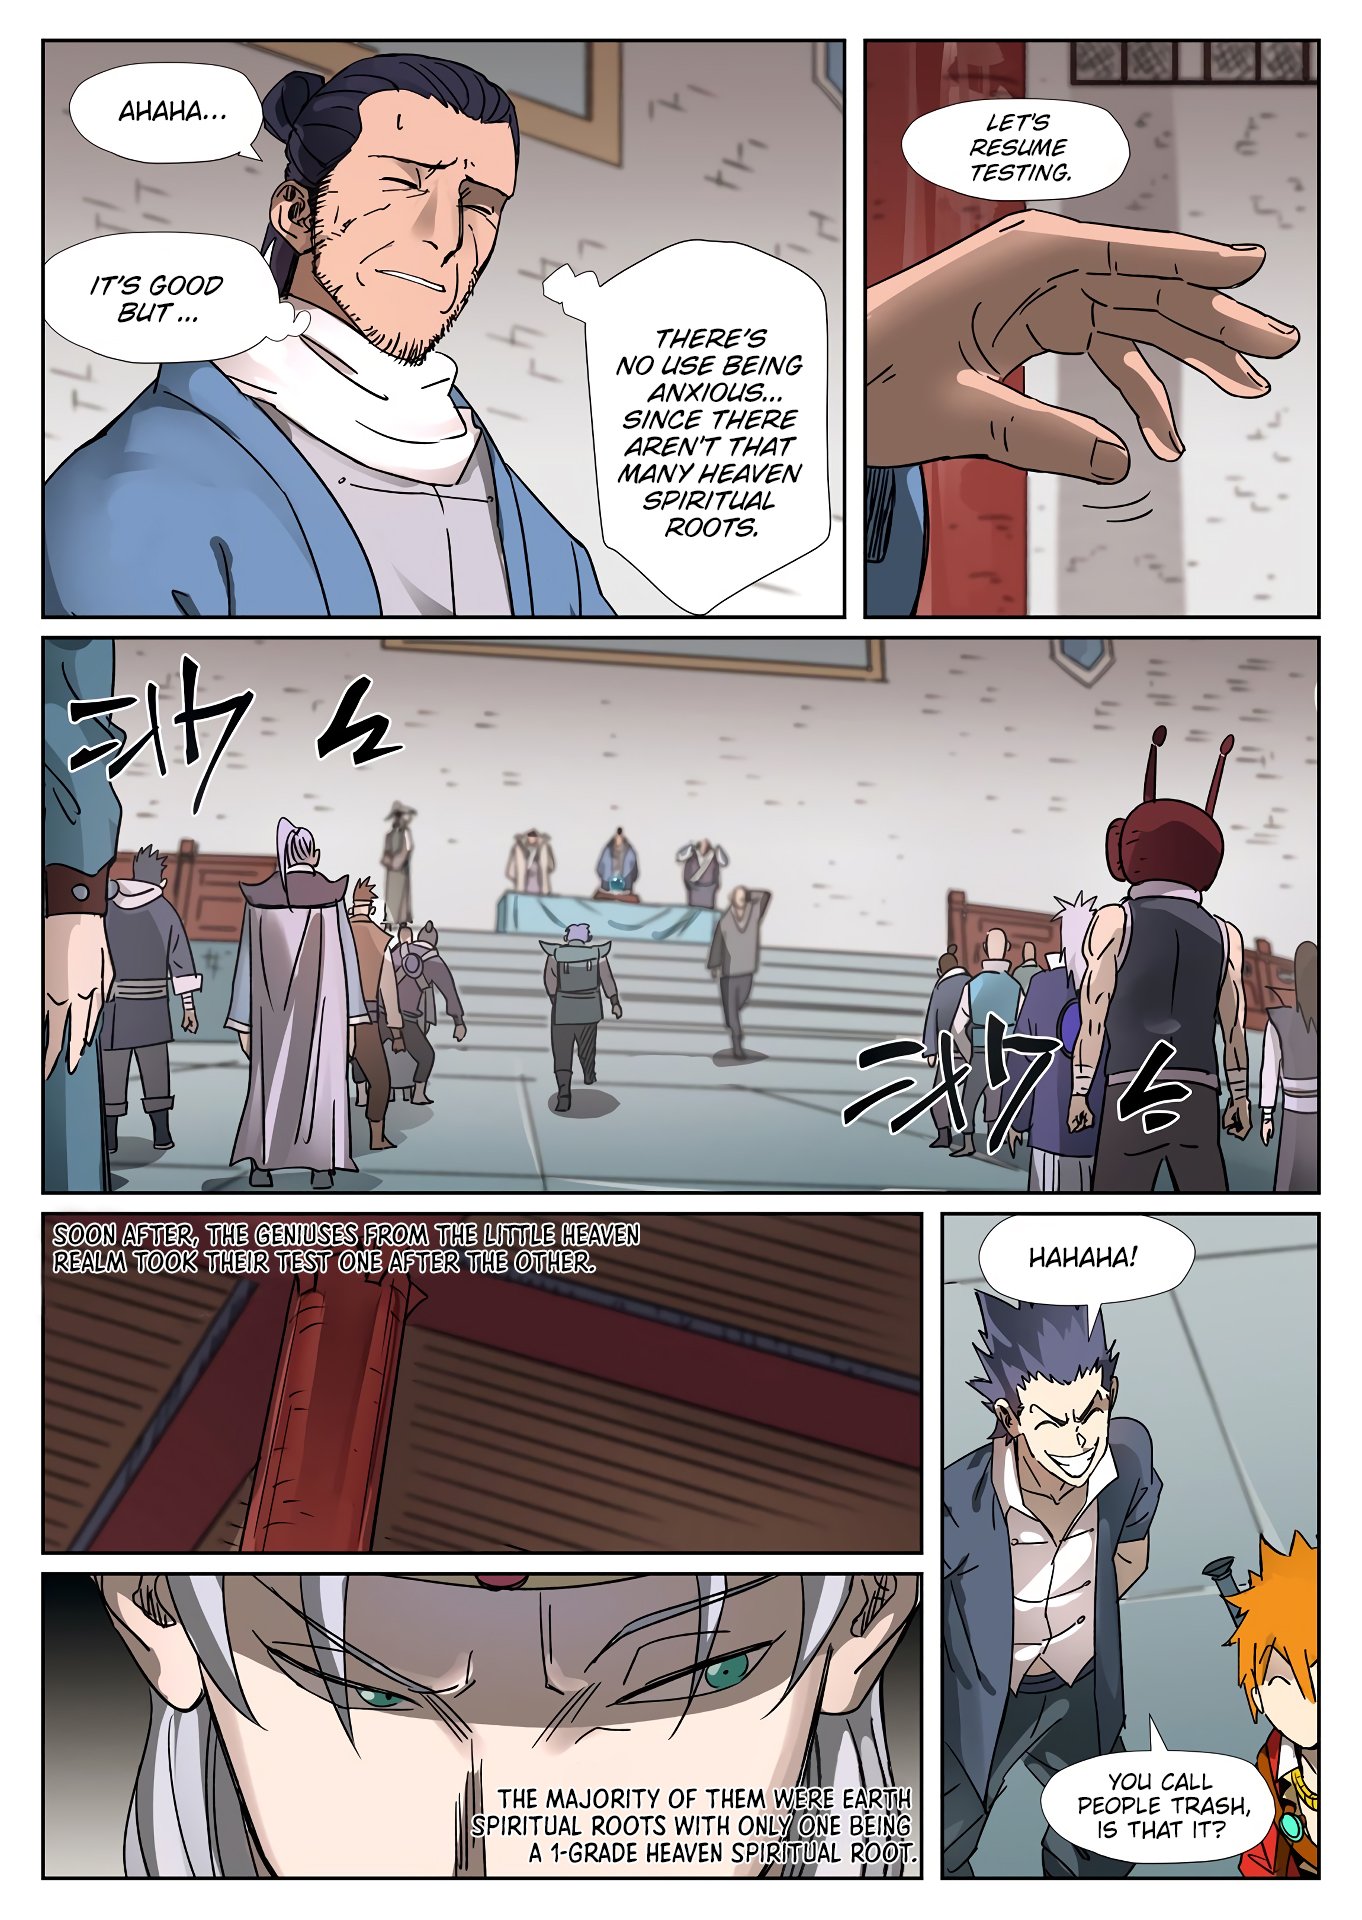 Tales of Demons and Gods Manhua Chapter 300.5 - Page 1